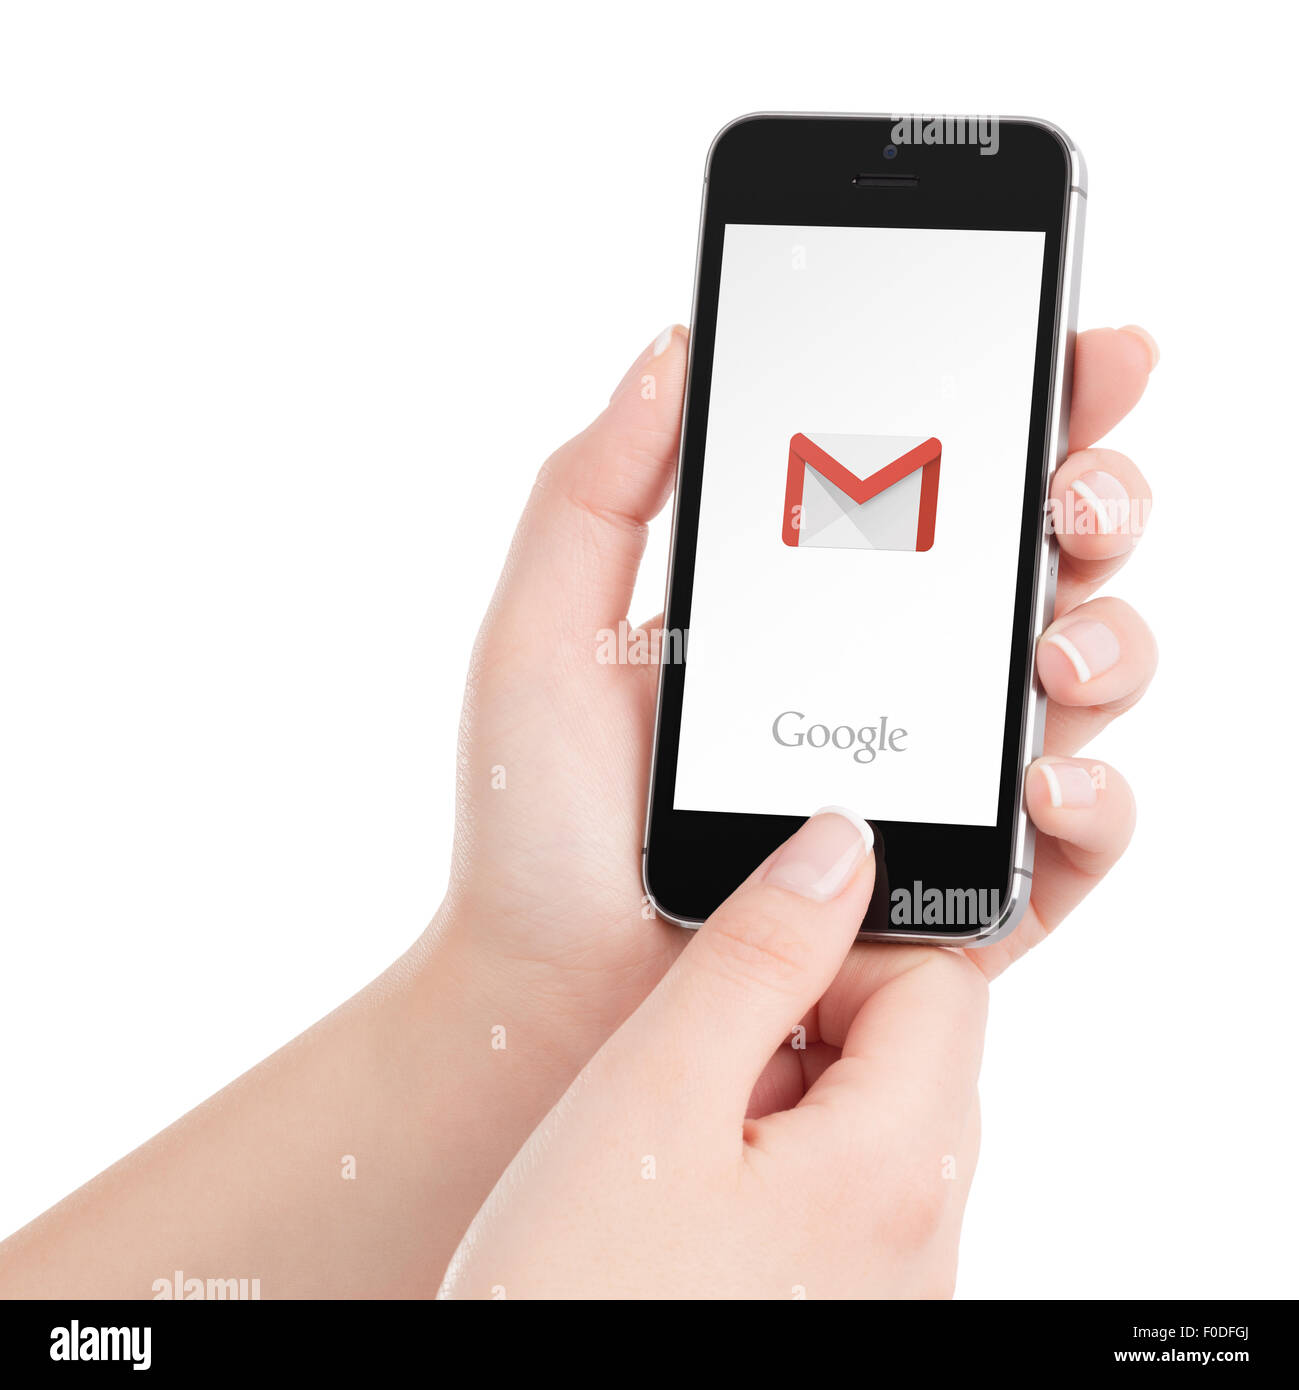 Varna, Bulgaria - May 31, 2015: Black Apple iPhone 5s with Google Gmail app logo on the display in female hands. Stock Photo